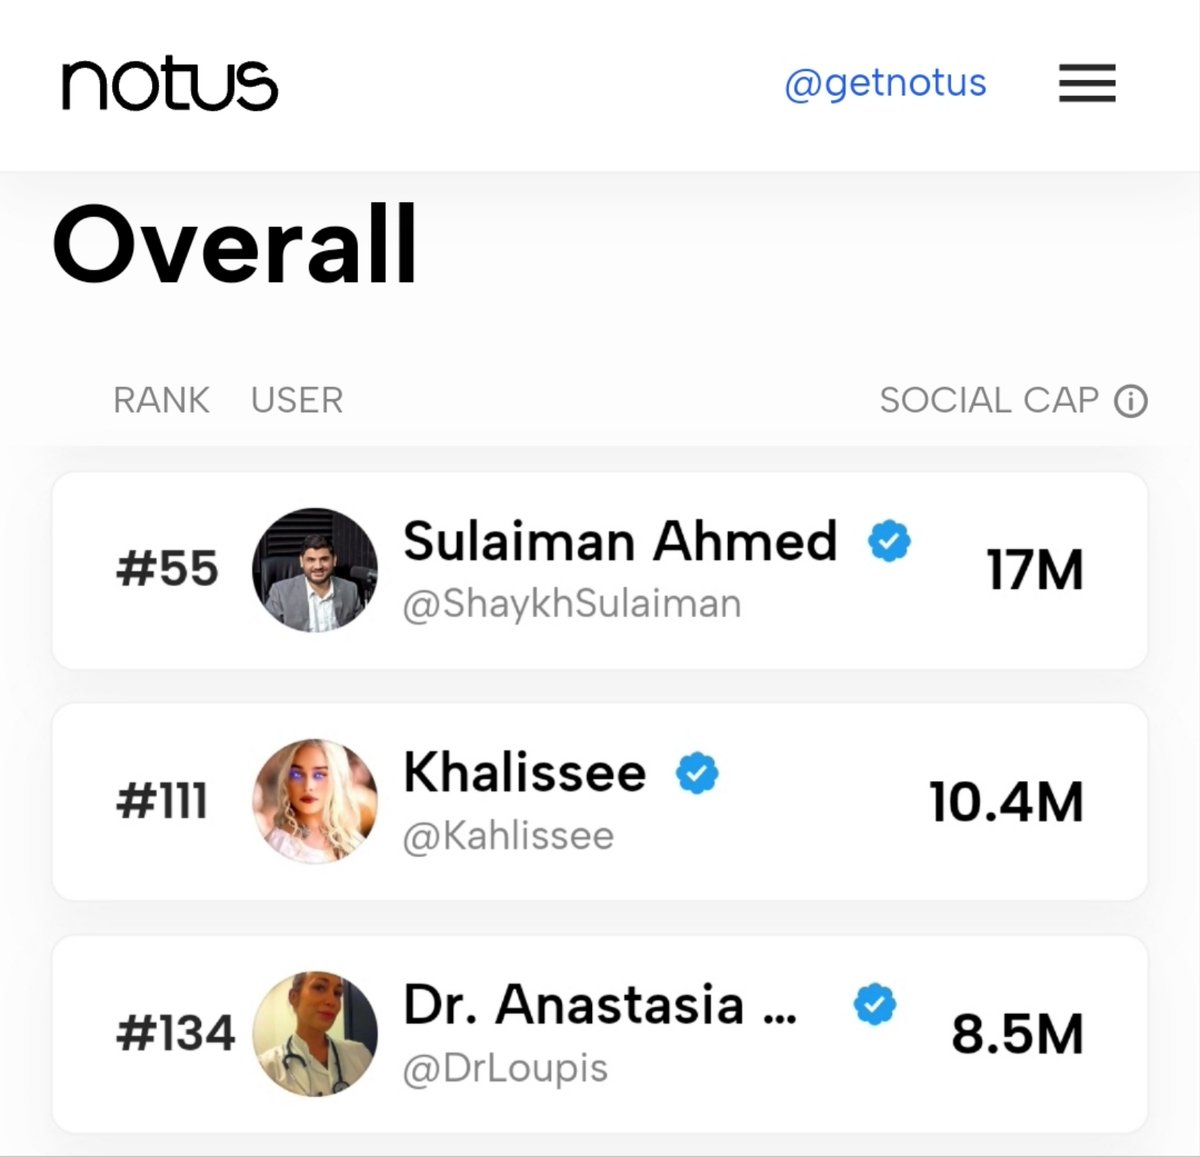 🥳🎉Big congratulations to @ShaykhSulaiman, @Kahlissee & @DrLoupis for making the 'Twitter Top 150' accounts list. Sulaiman is beating out zionist accounts like libsoftiktok & Visegrad 24, while Khalissee is beating out the likes of zio-chump Ian Miles Cheong. Meanwhile, Dr.